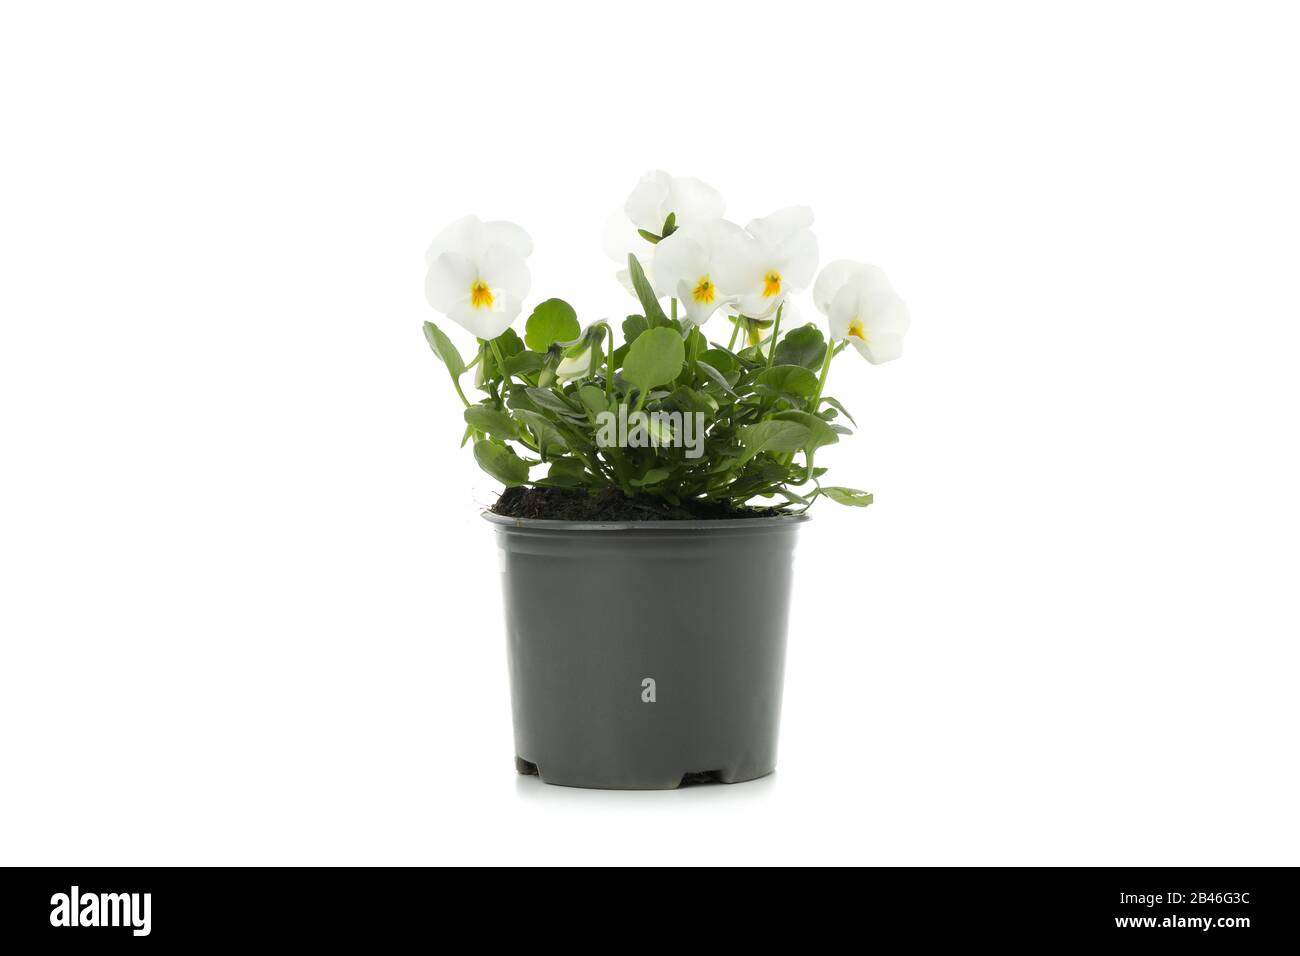 White pansies in flower pot isolated on white background Stock Photo